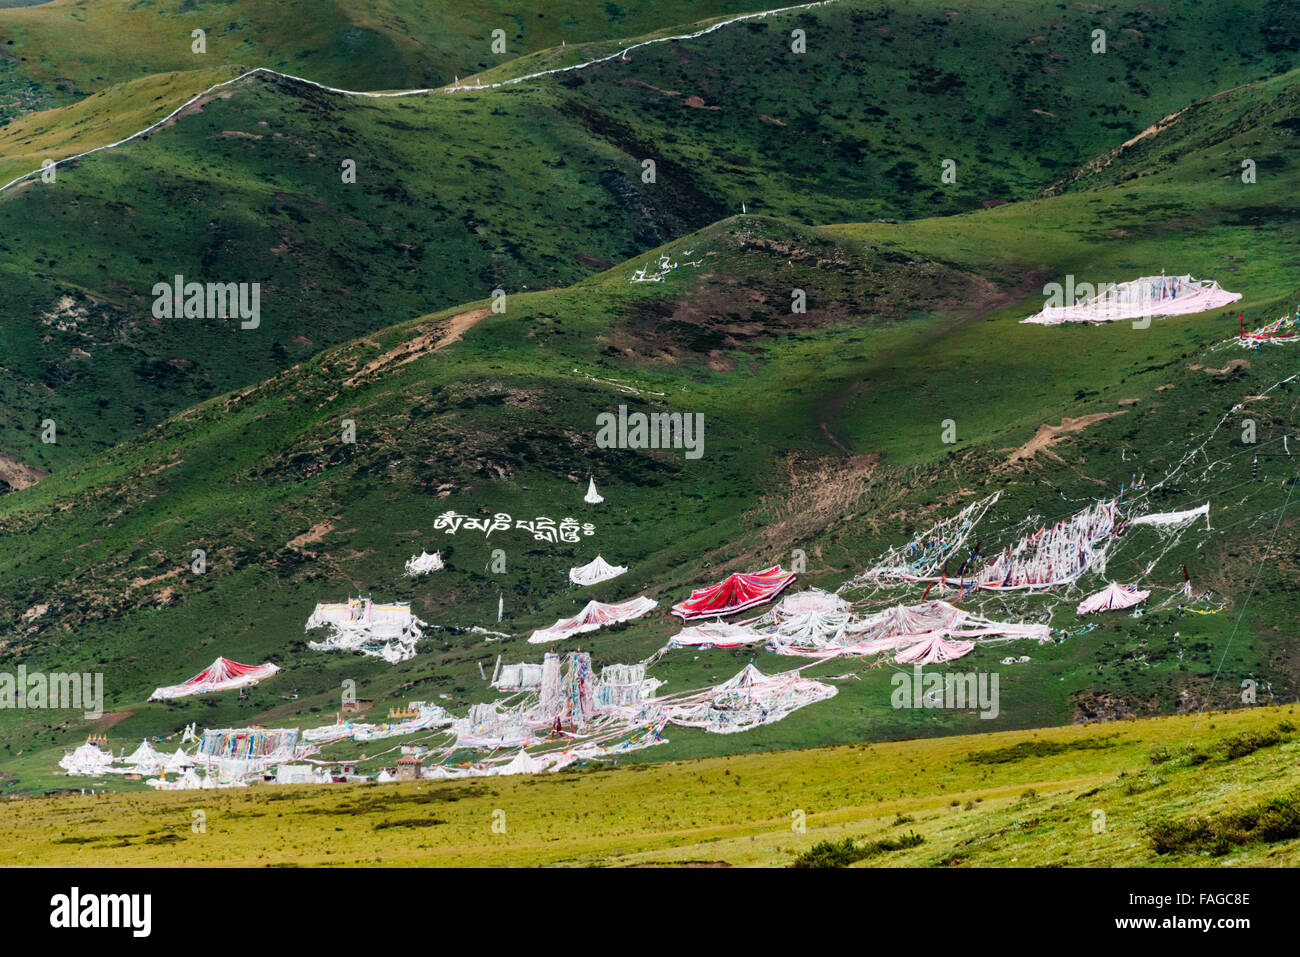 Praying words and praying flags on the mountain side, Seda Larong Wuming Buddhist Institute, Garze, Sichuan Province, China Stock Photo